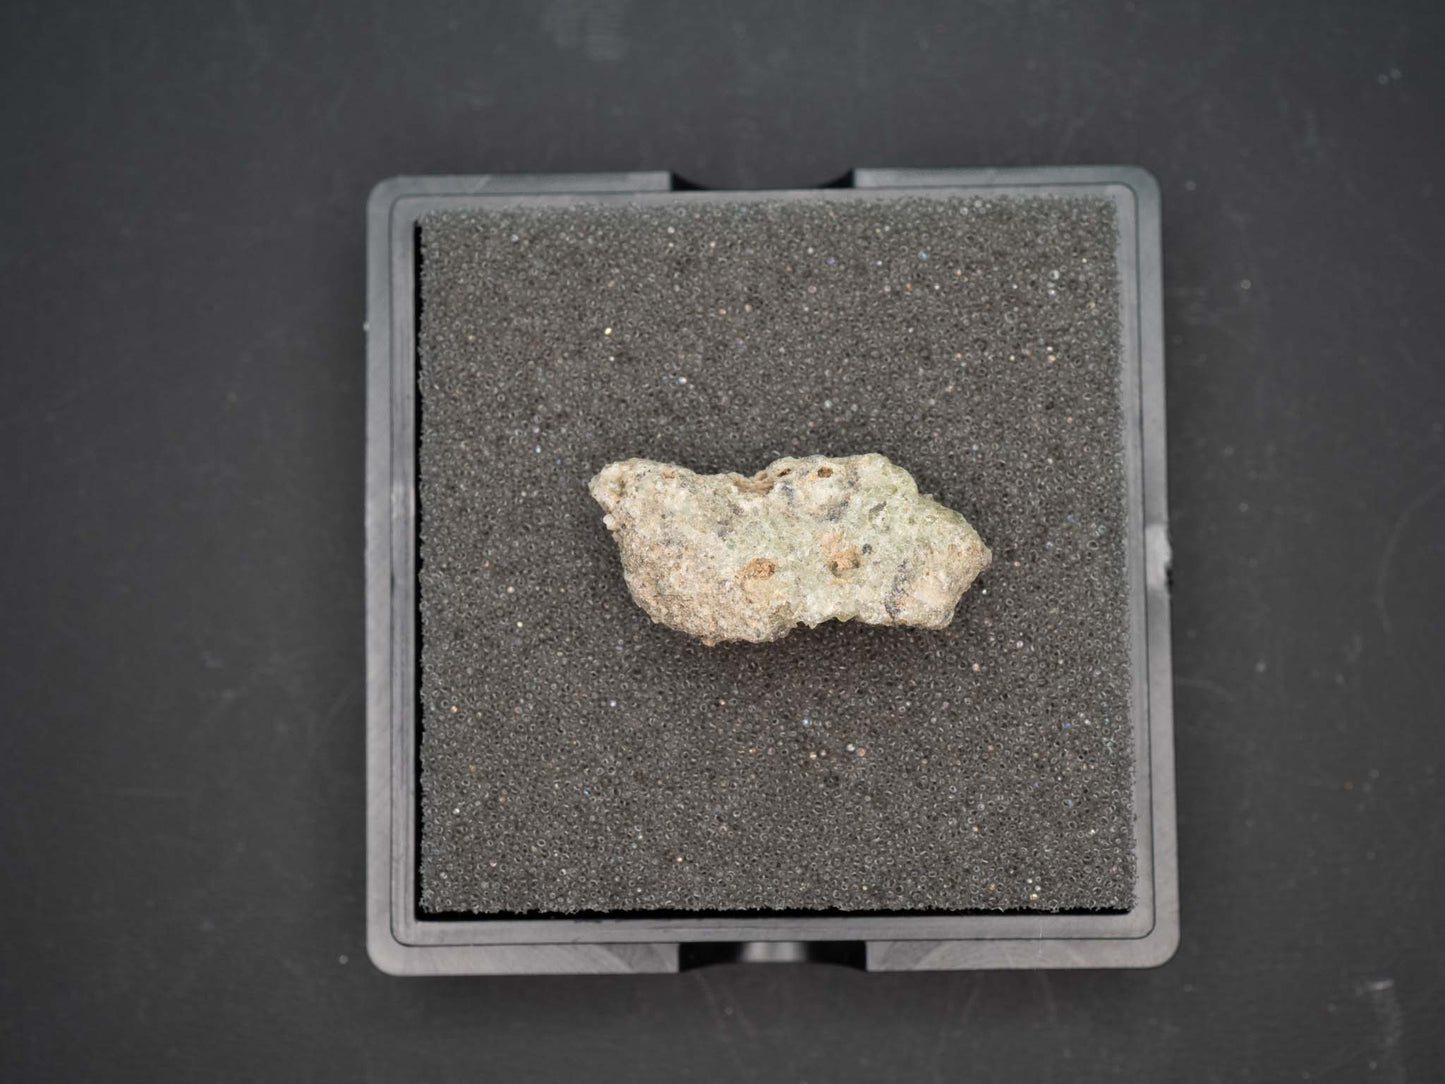 Trinitite (0.8 grams) - Trinity site, White Sands Missile Range, Socorro County, New Mexico, USA - July 16, 1945 at 5:29am MWT